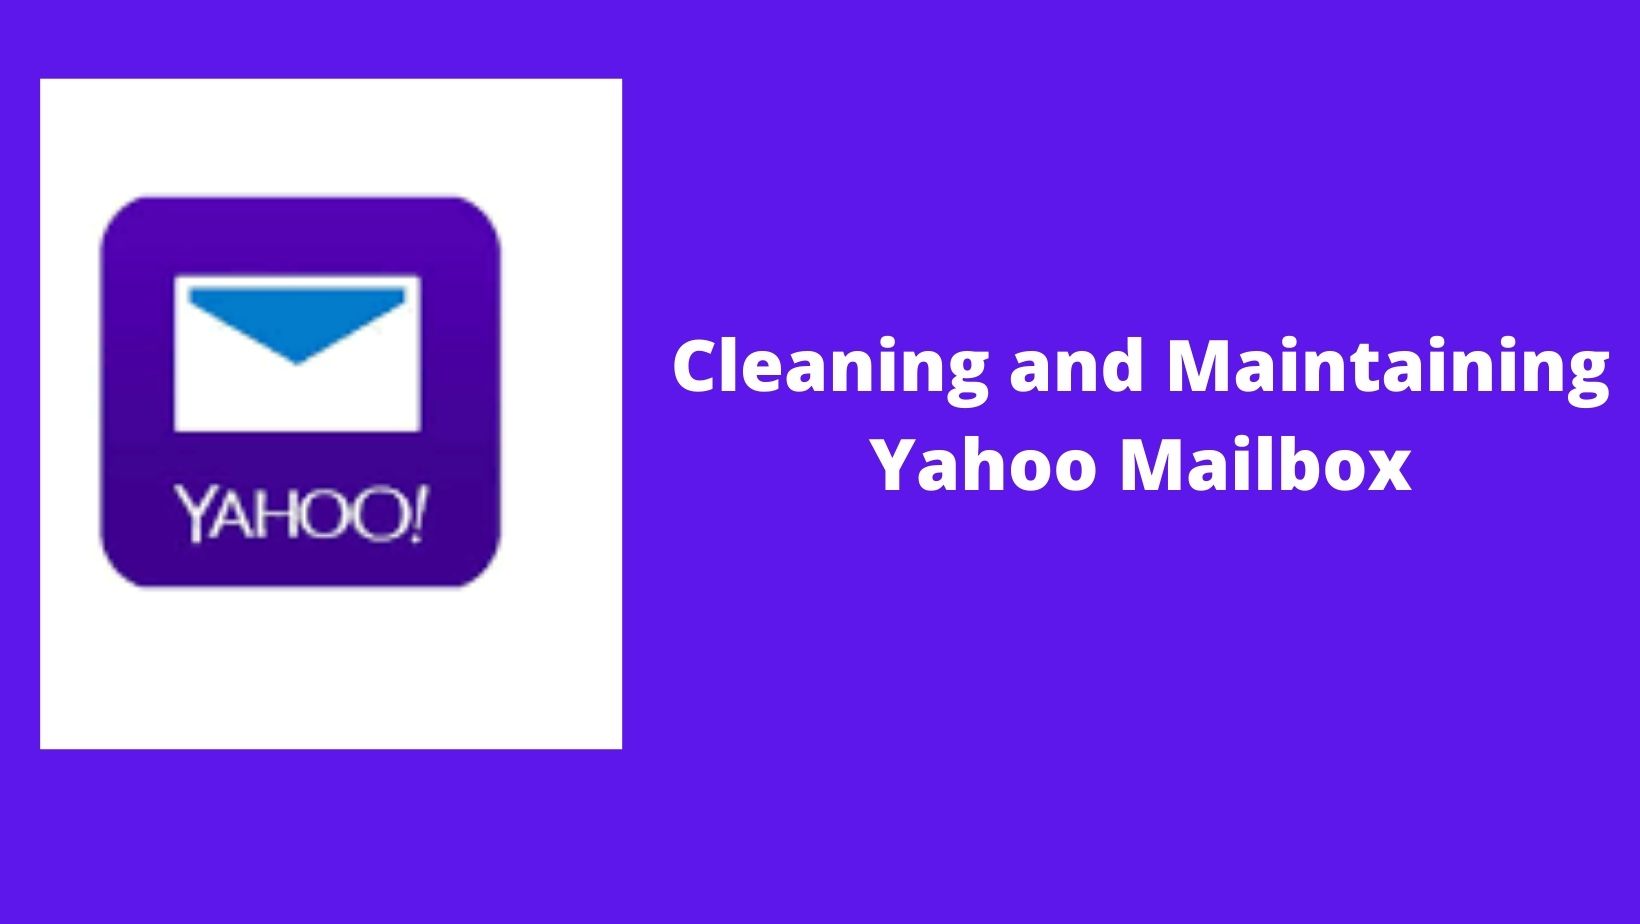 Cleaning and maintaining Yahoo Mailbox